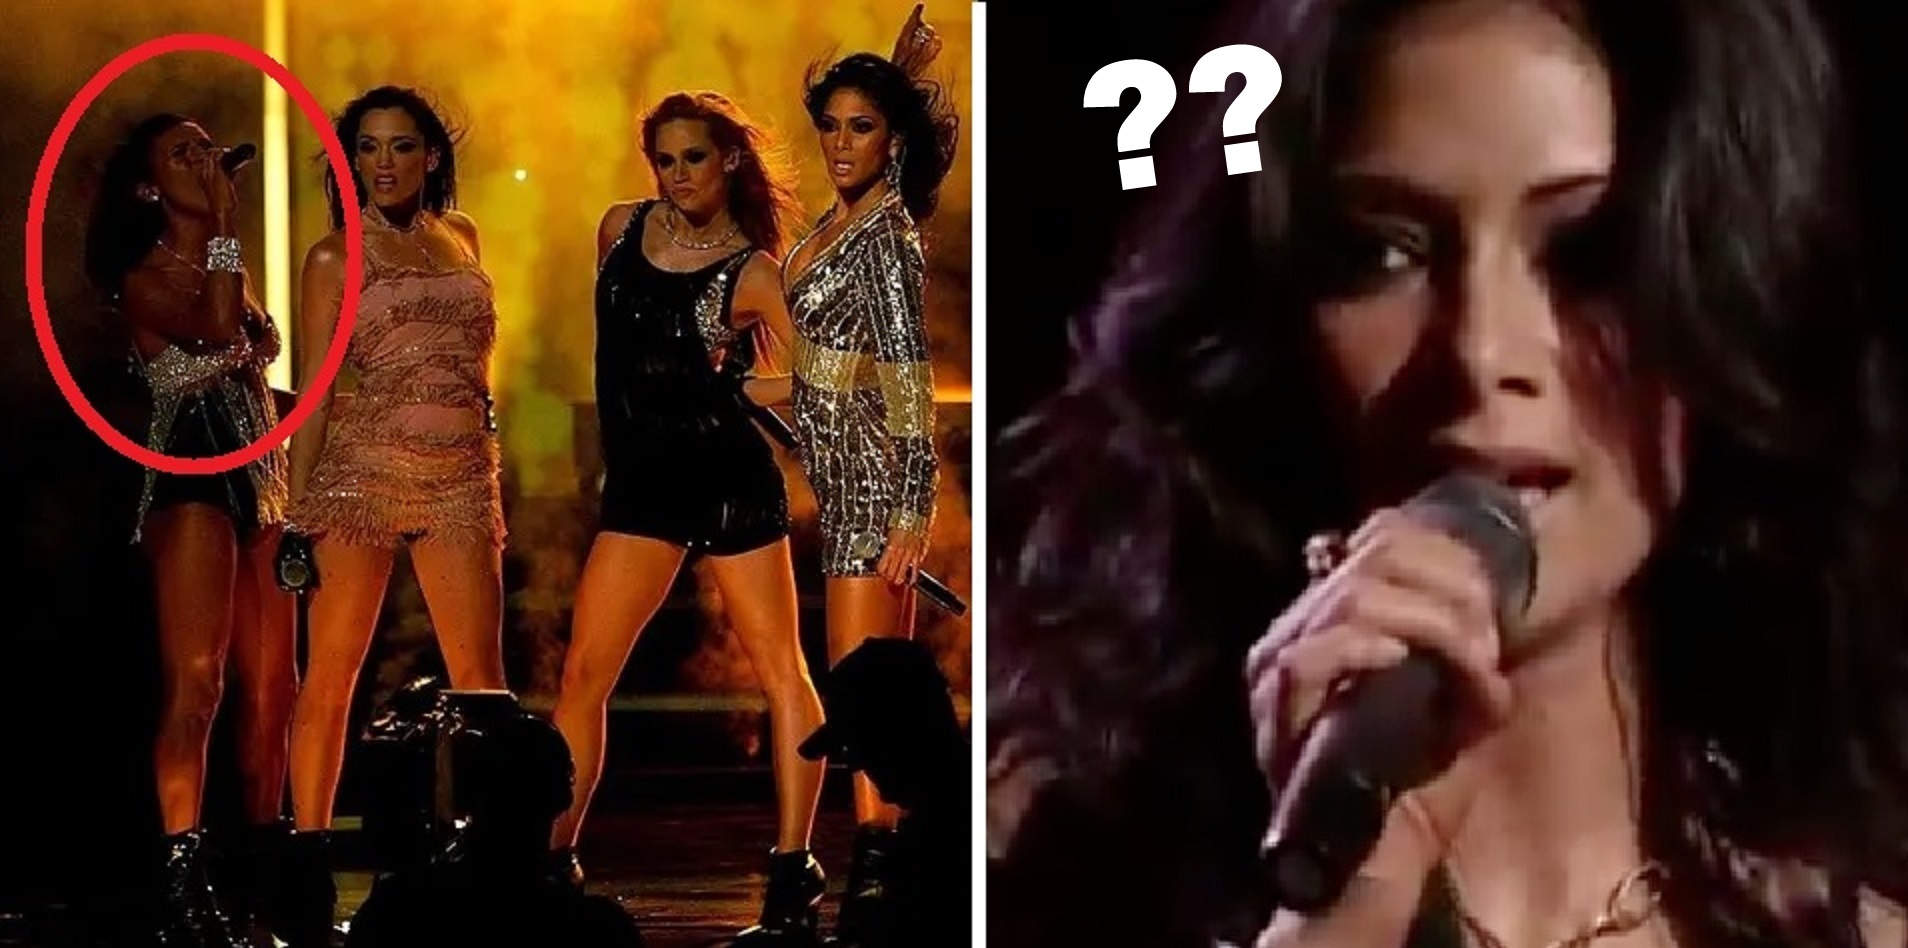 Throwback: When Melody Thornton Embarrassed PCD With an ‘Unplanned Vocal Battle’ at the AMAs